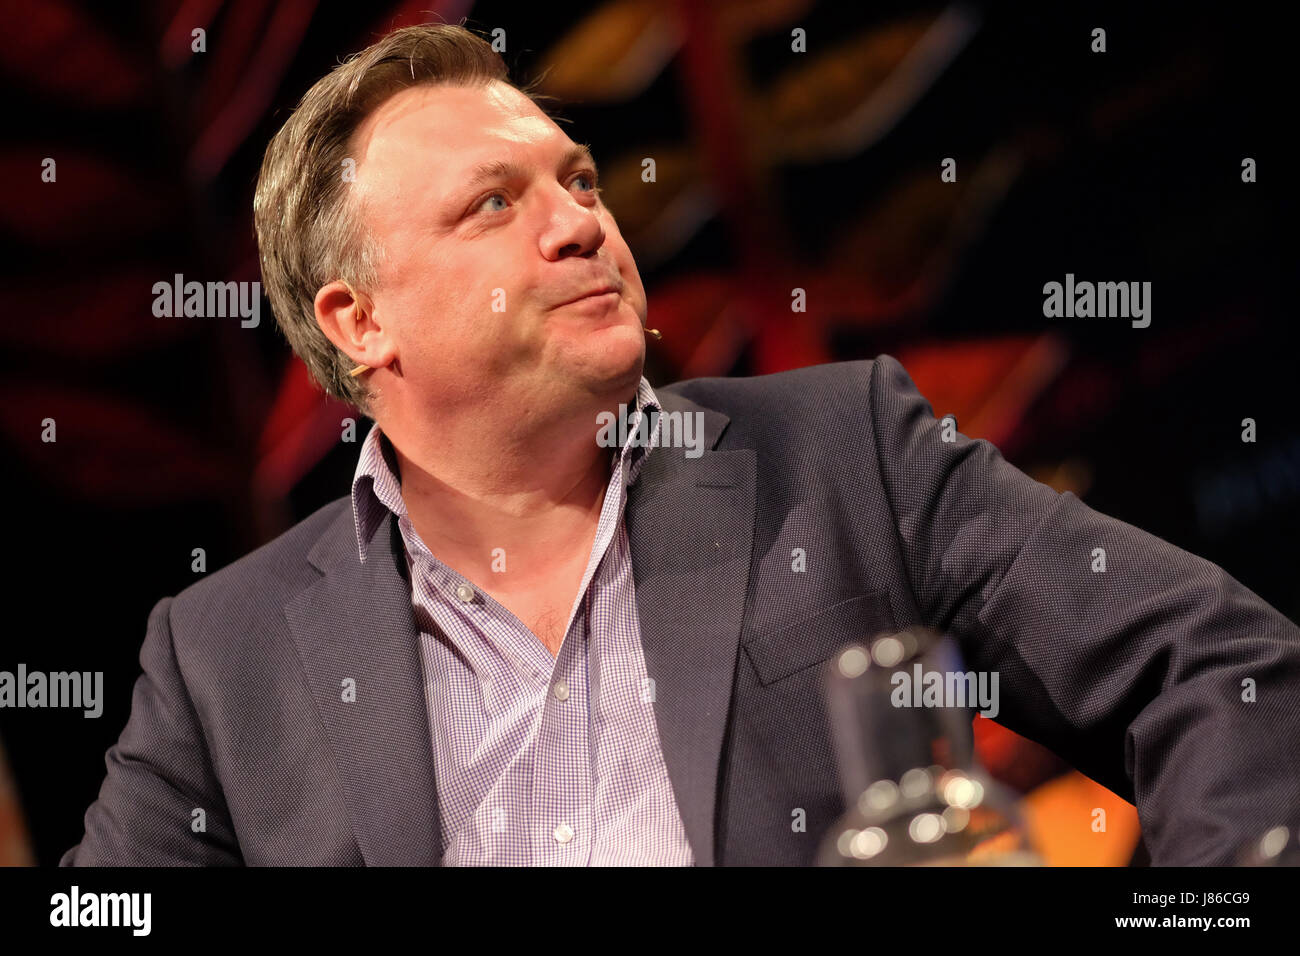 Hay Festival 2017 - Hay on Wye, Wales, UK - Saturday 27th May 2017 - Former politician Ed Balls on stage talking about his book Speaking Out at the Hay Festival - the Hay Festival celebrates its 30th anniversary in 2017 - the literary festival runs until Sunday June 4th.  Steven May / Alamy Live News Stock Photo